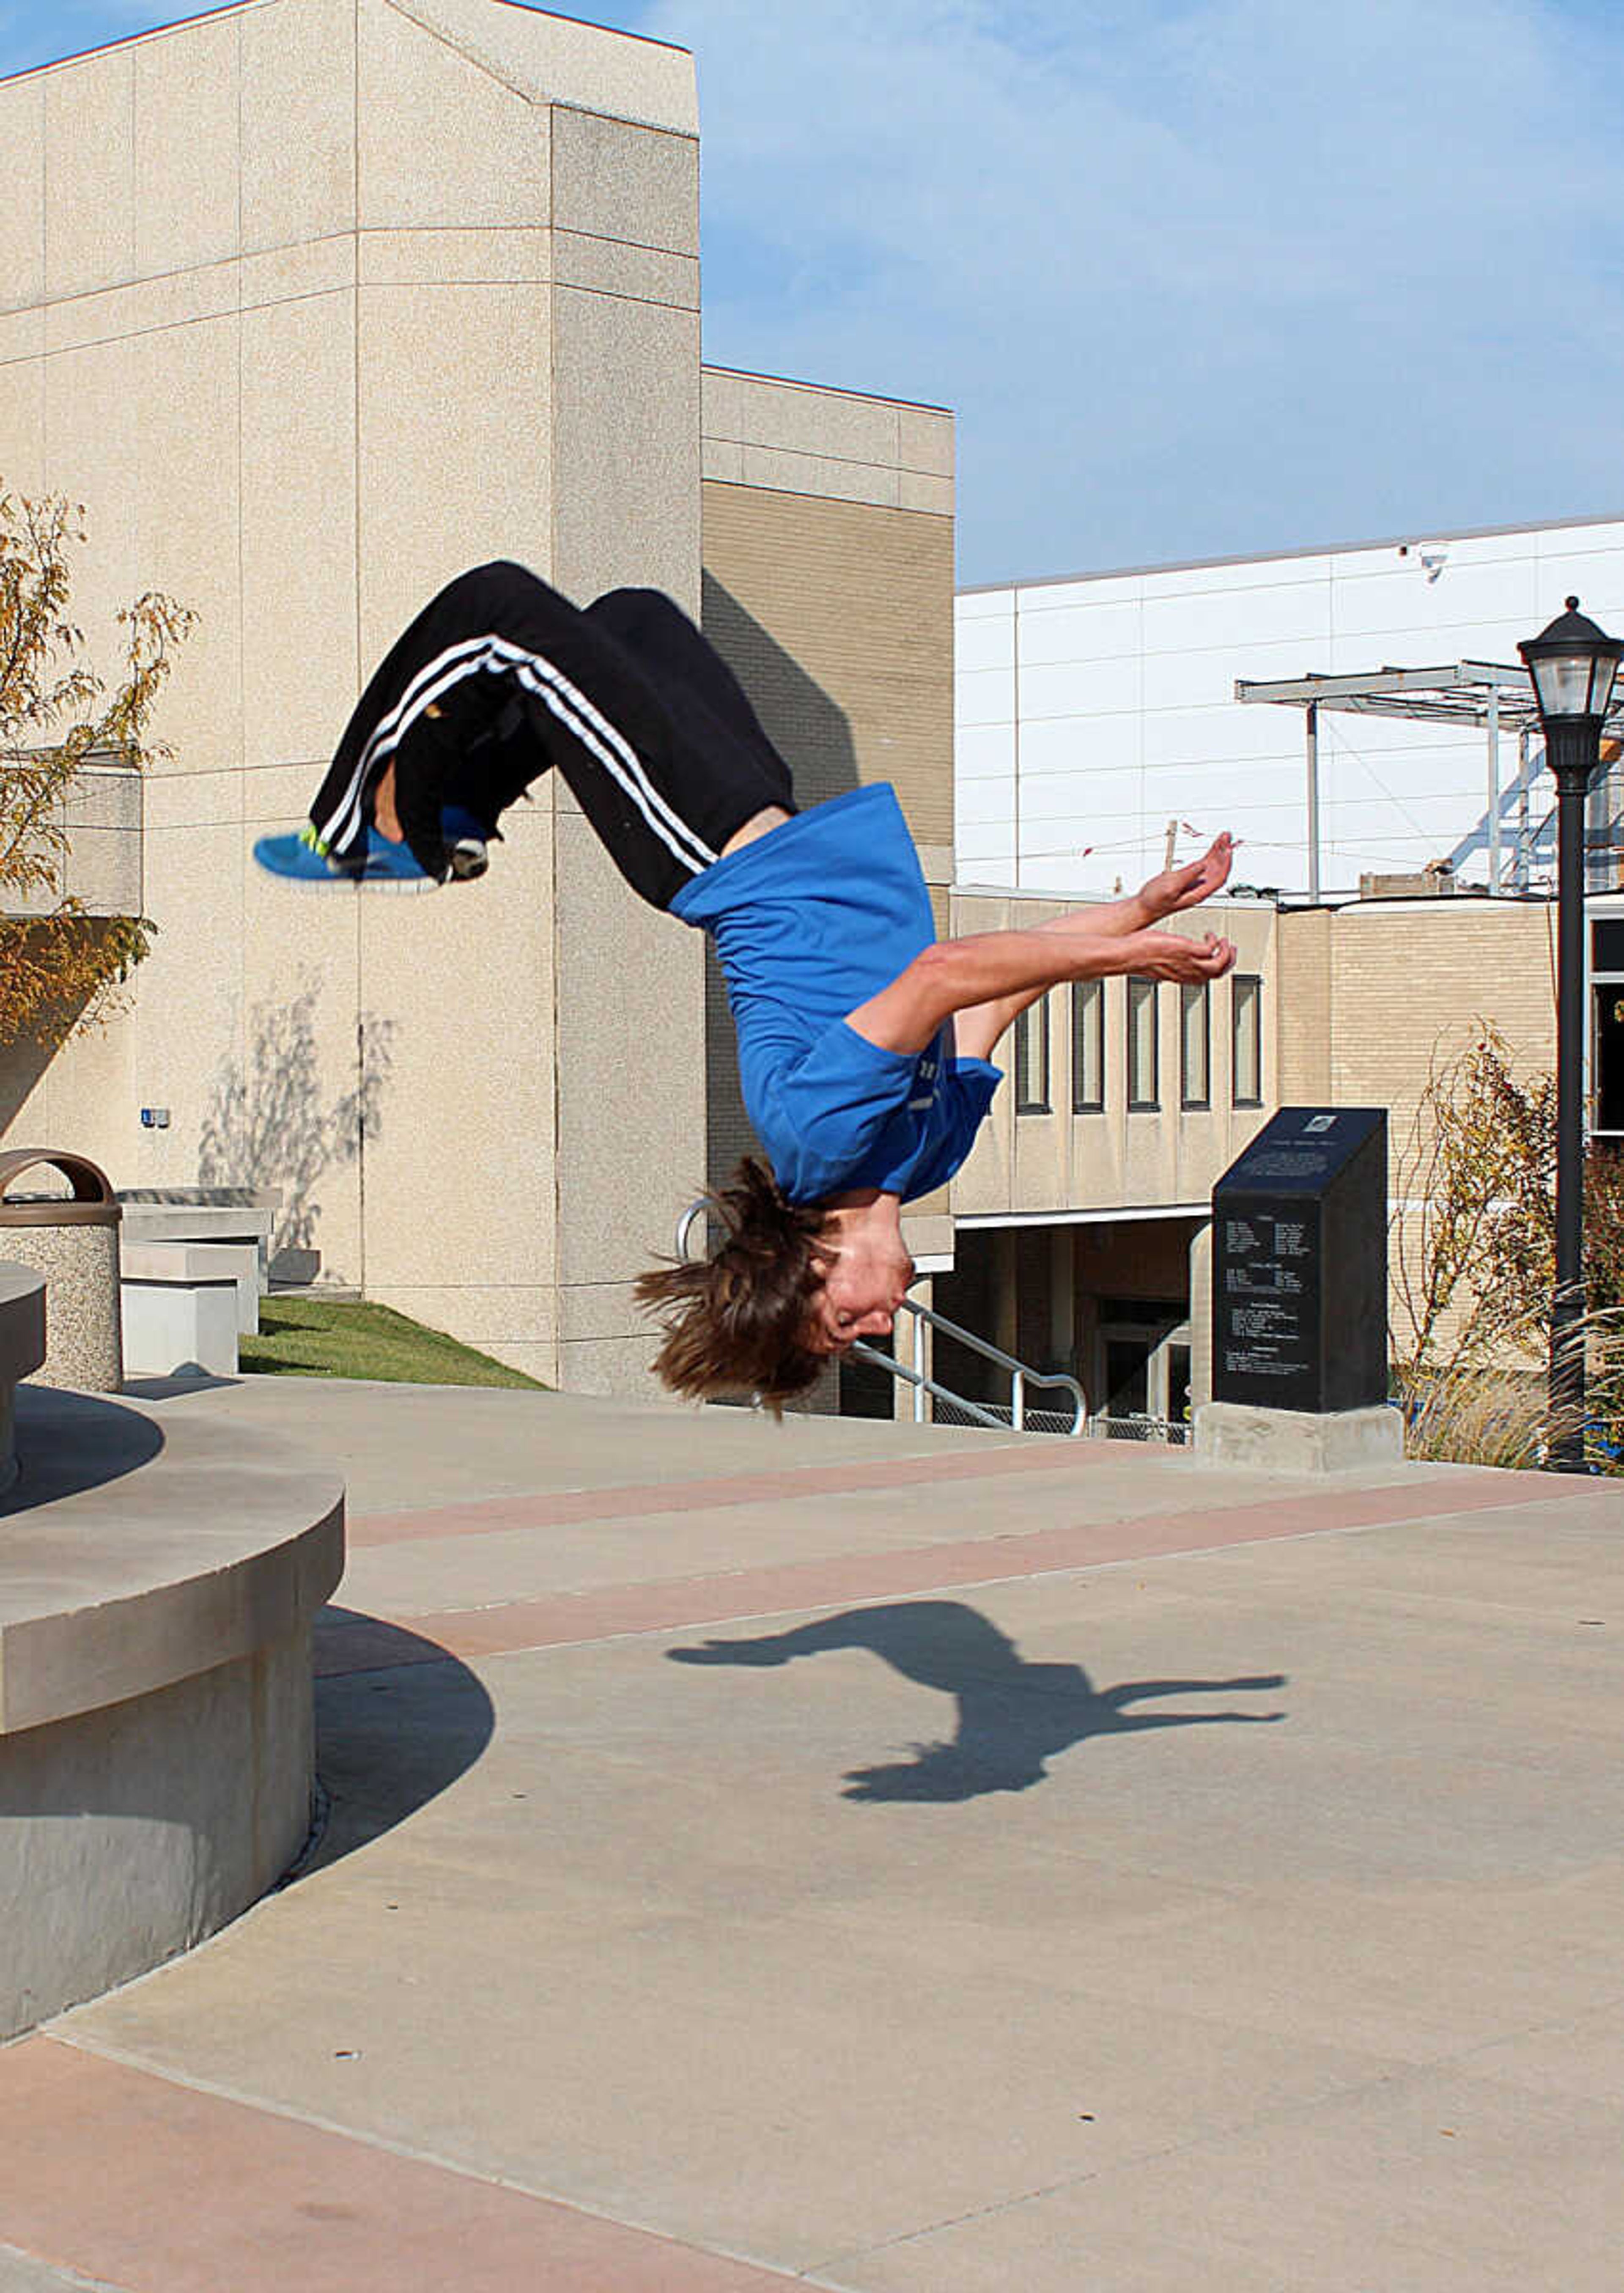 Sophomore Kyle Thies, president and founder of the Parkour and Free-Running Club, shows off his skills by doing a back flip off the fountain in front of Dempster Hall. Photo by Ashley Reed